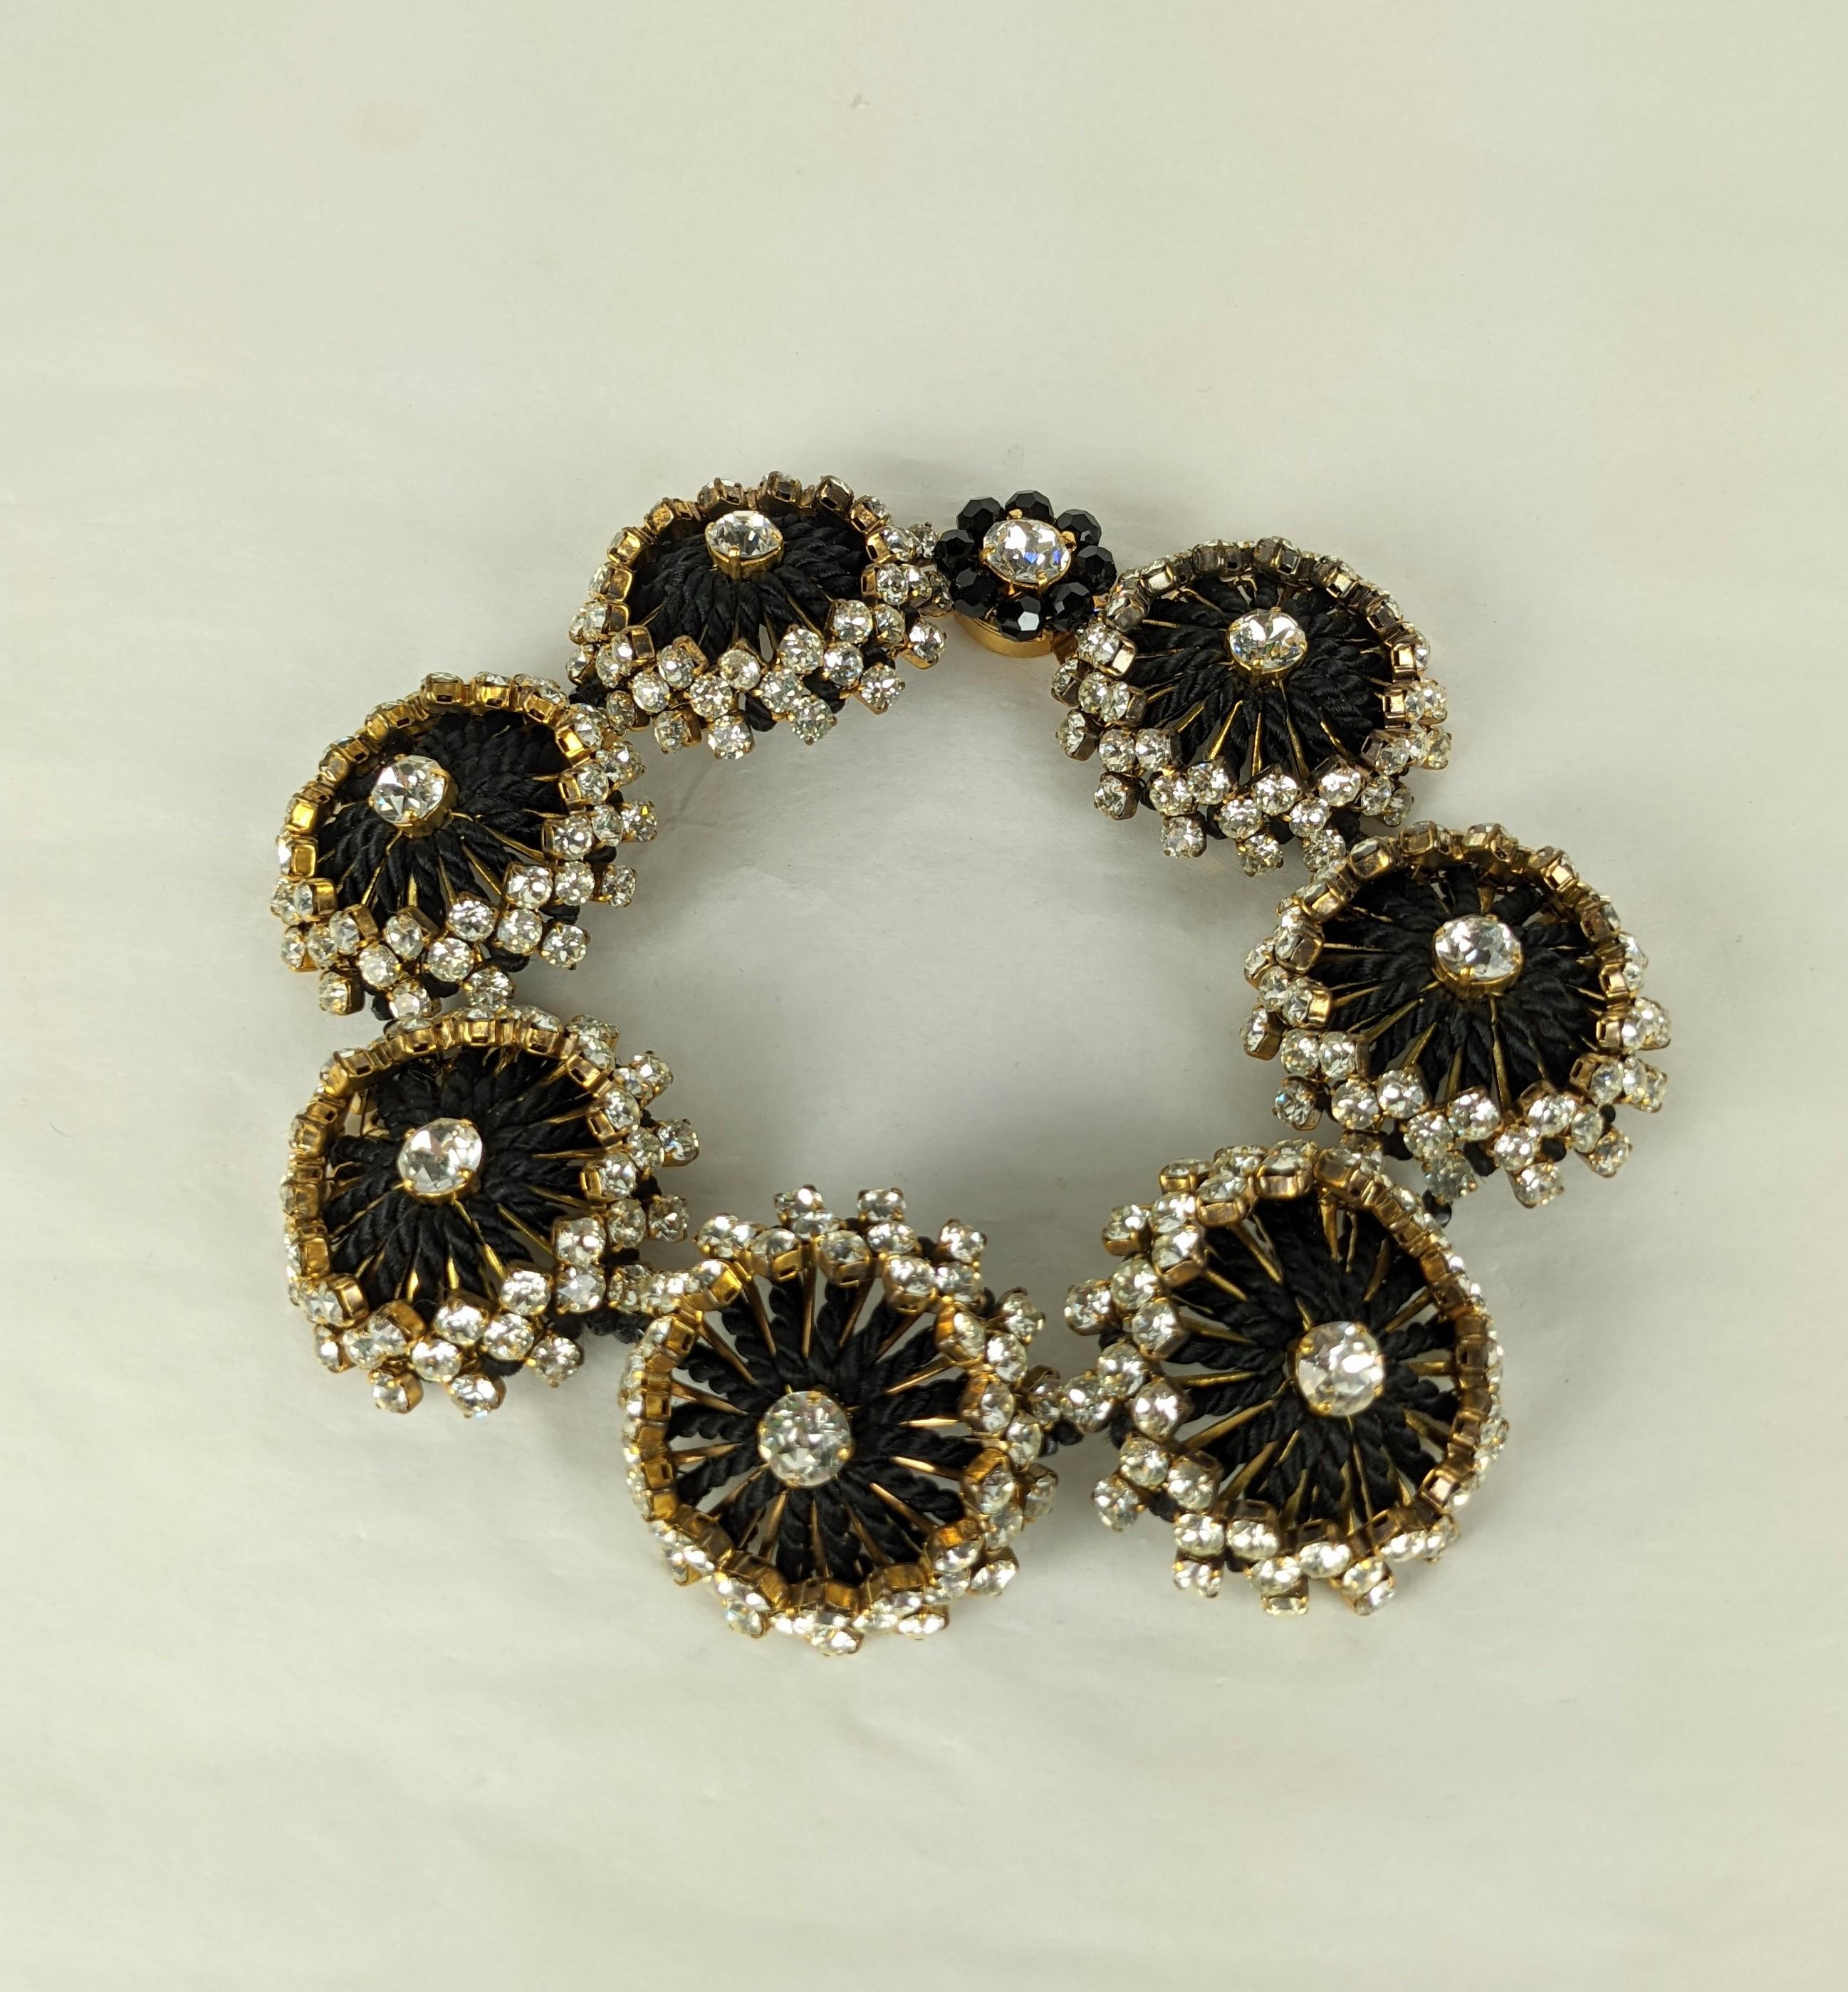 Hubert de Givenchy Haute Couture gilt flower head passementerie choker from the estate of Bunny Mellon. The large flower head links composed of crystal rhinestone set gilt metal stamens enhanced by black silk twisted passementerie cording.  Faceted